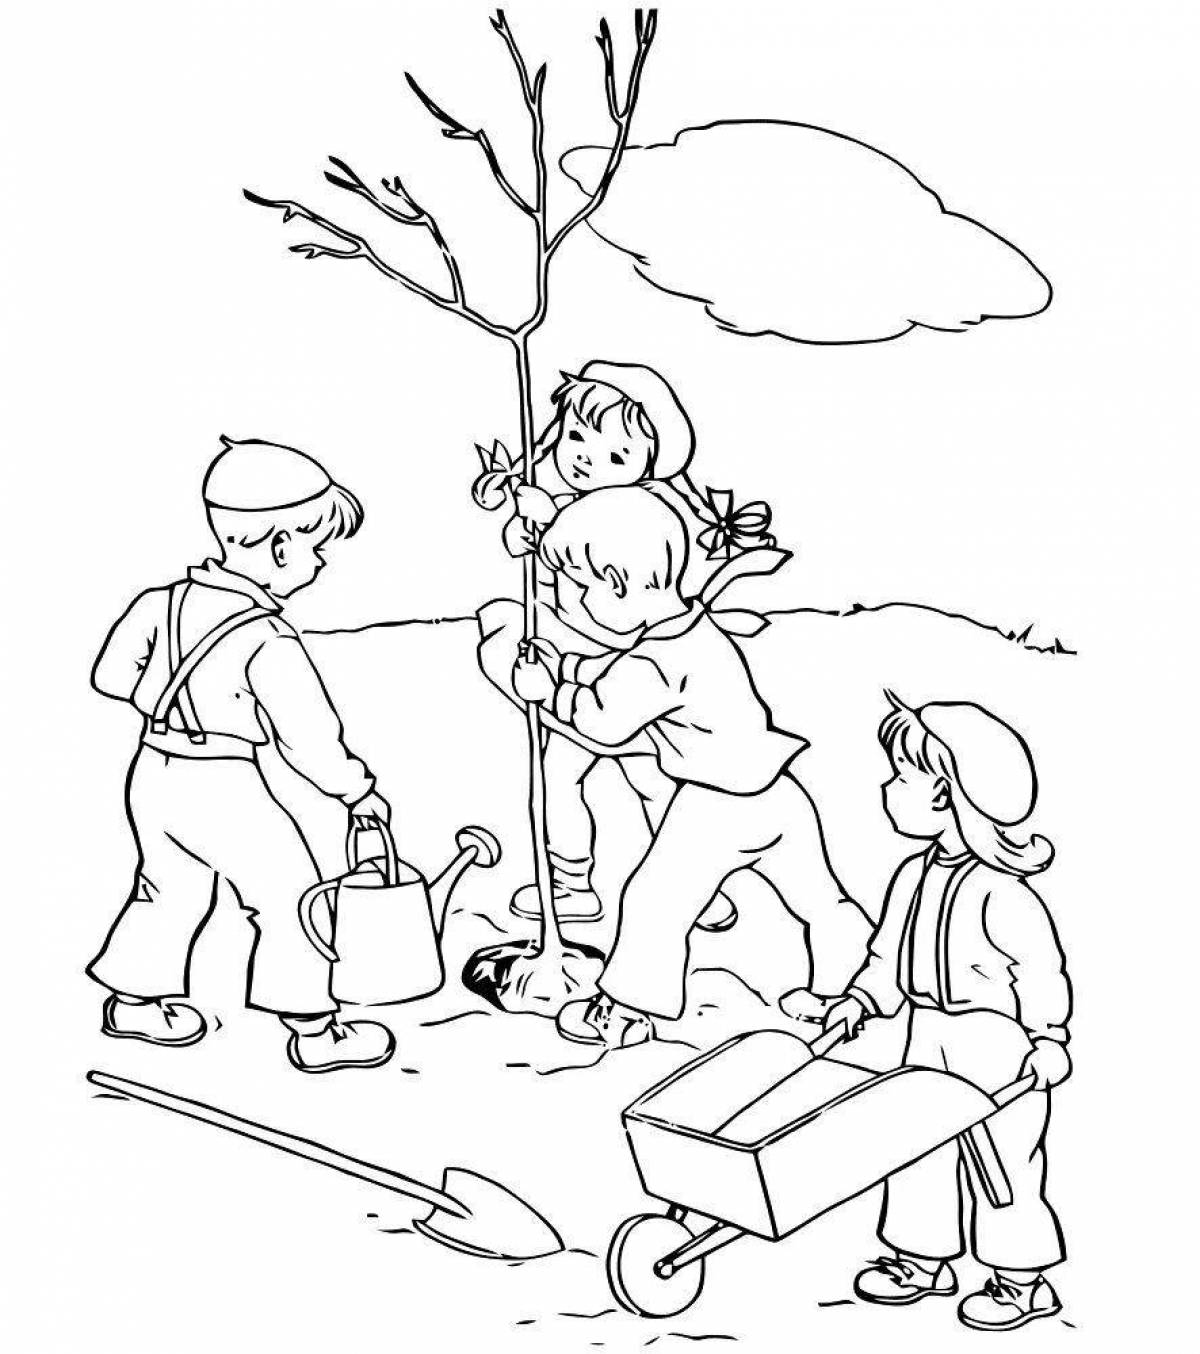 Coloring book charming ecologist